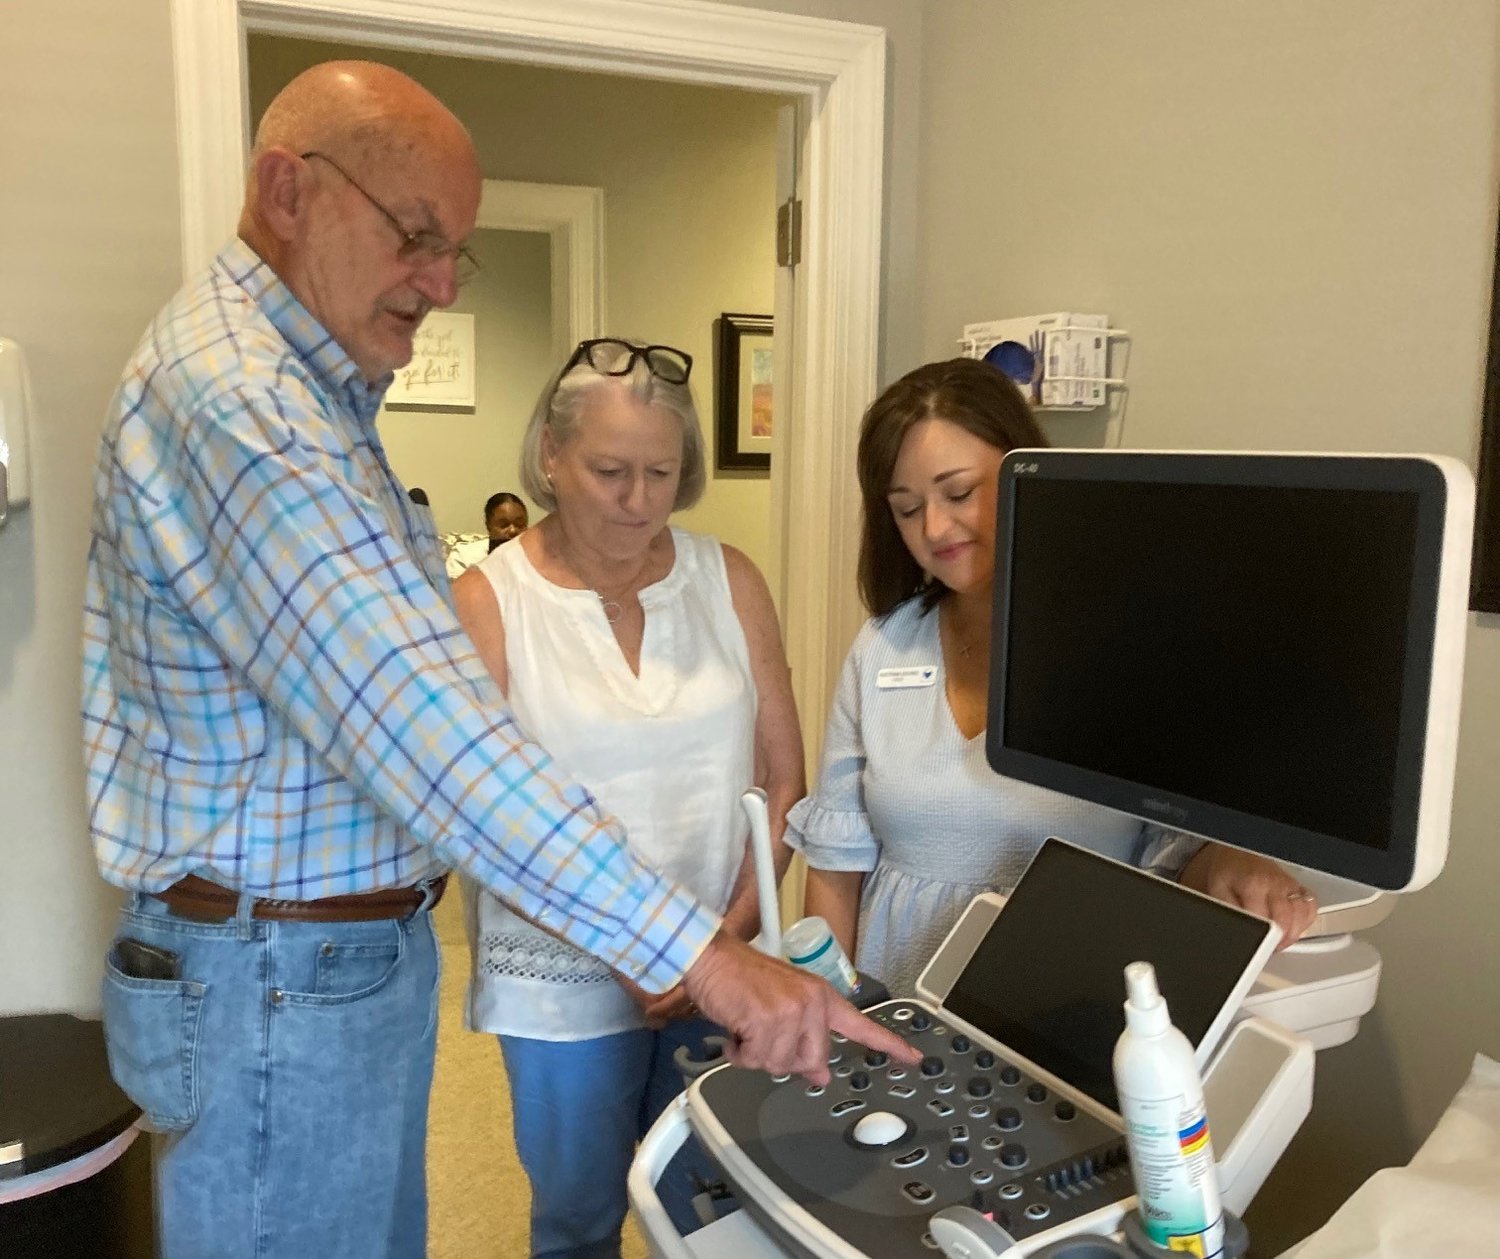 Crisis pregnancy centers across Georgia are ready to assist women in the wake of the Roe v. Wade reversal. In this photo, Moultrie Pastor Stanley Norman, his wife Nancy, center, and Hope House director Katrina Bivins take a look at the new ultrasound machine at the crisis pregnancy center in Moultrie. (Index/Roger Alford)